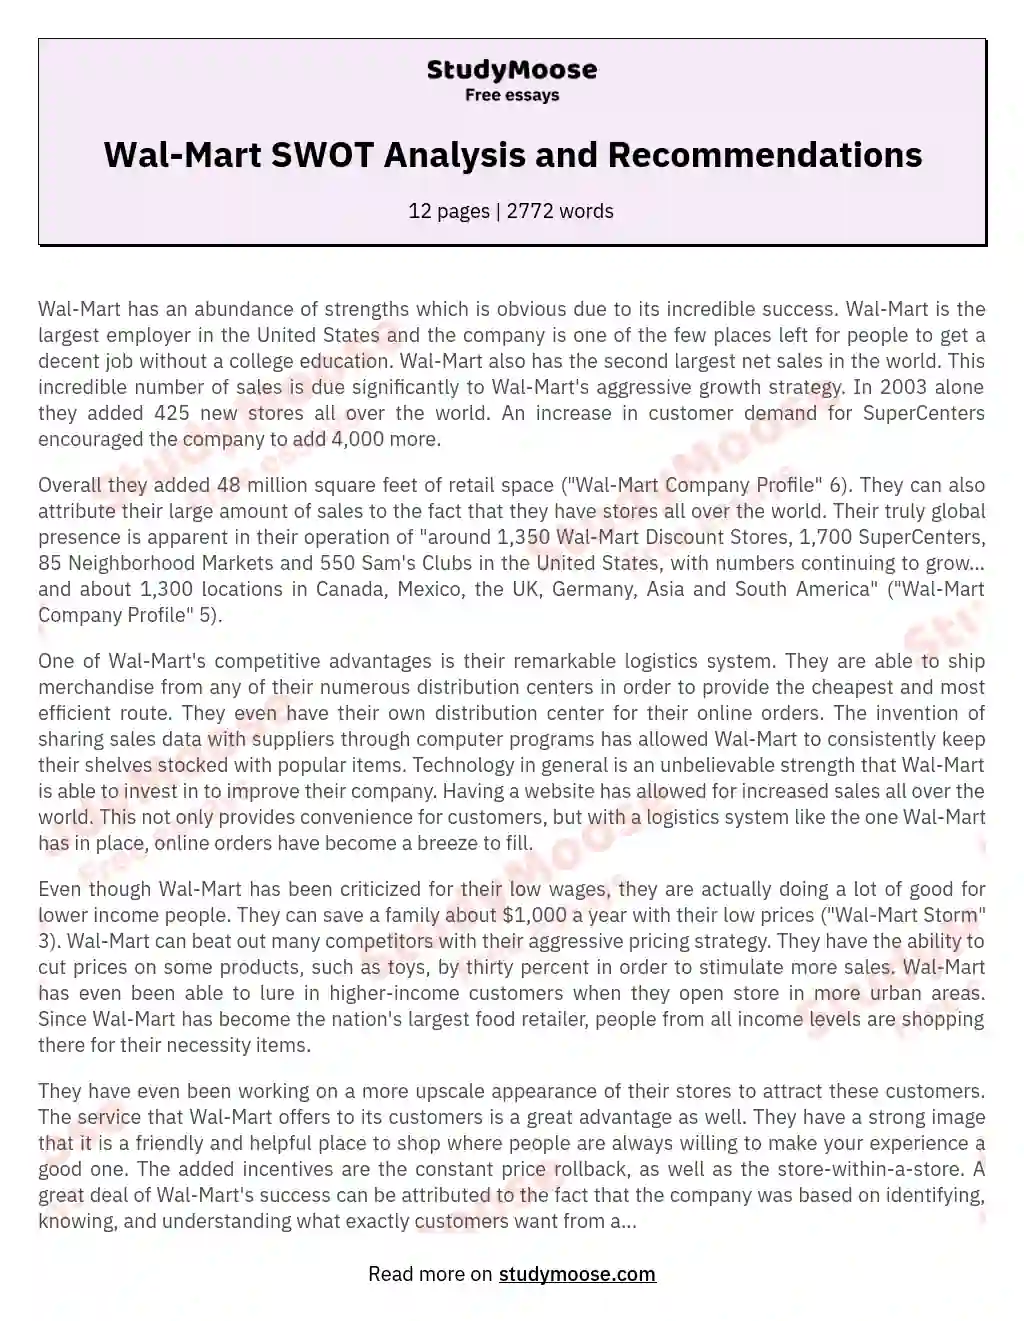 Wal-Mart SWOT Analysis and Recommendations essay